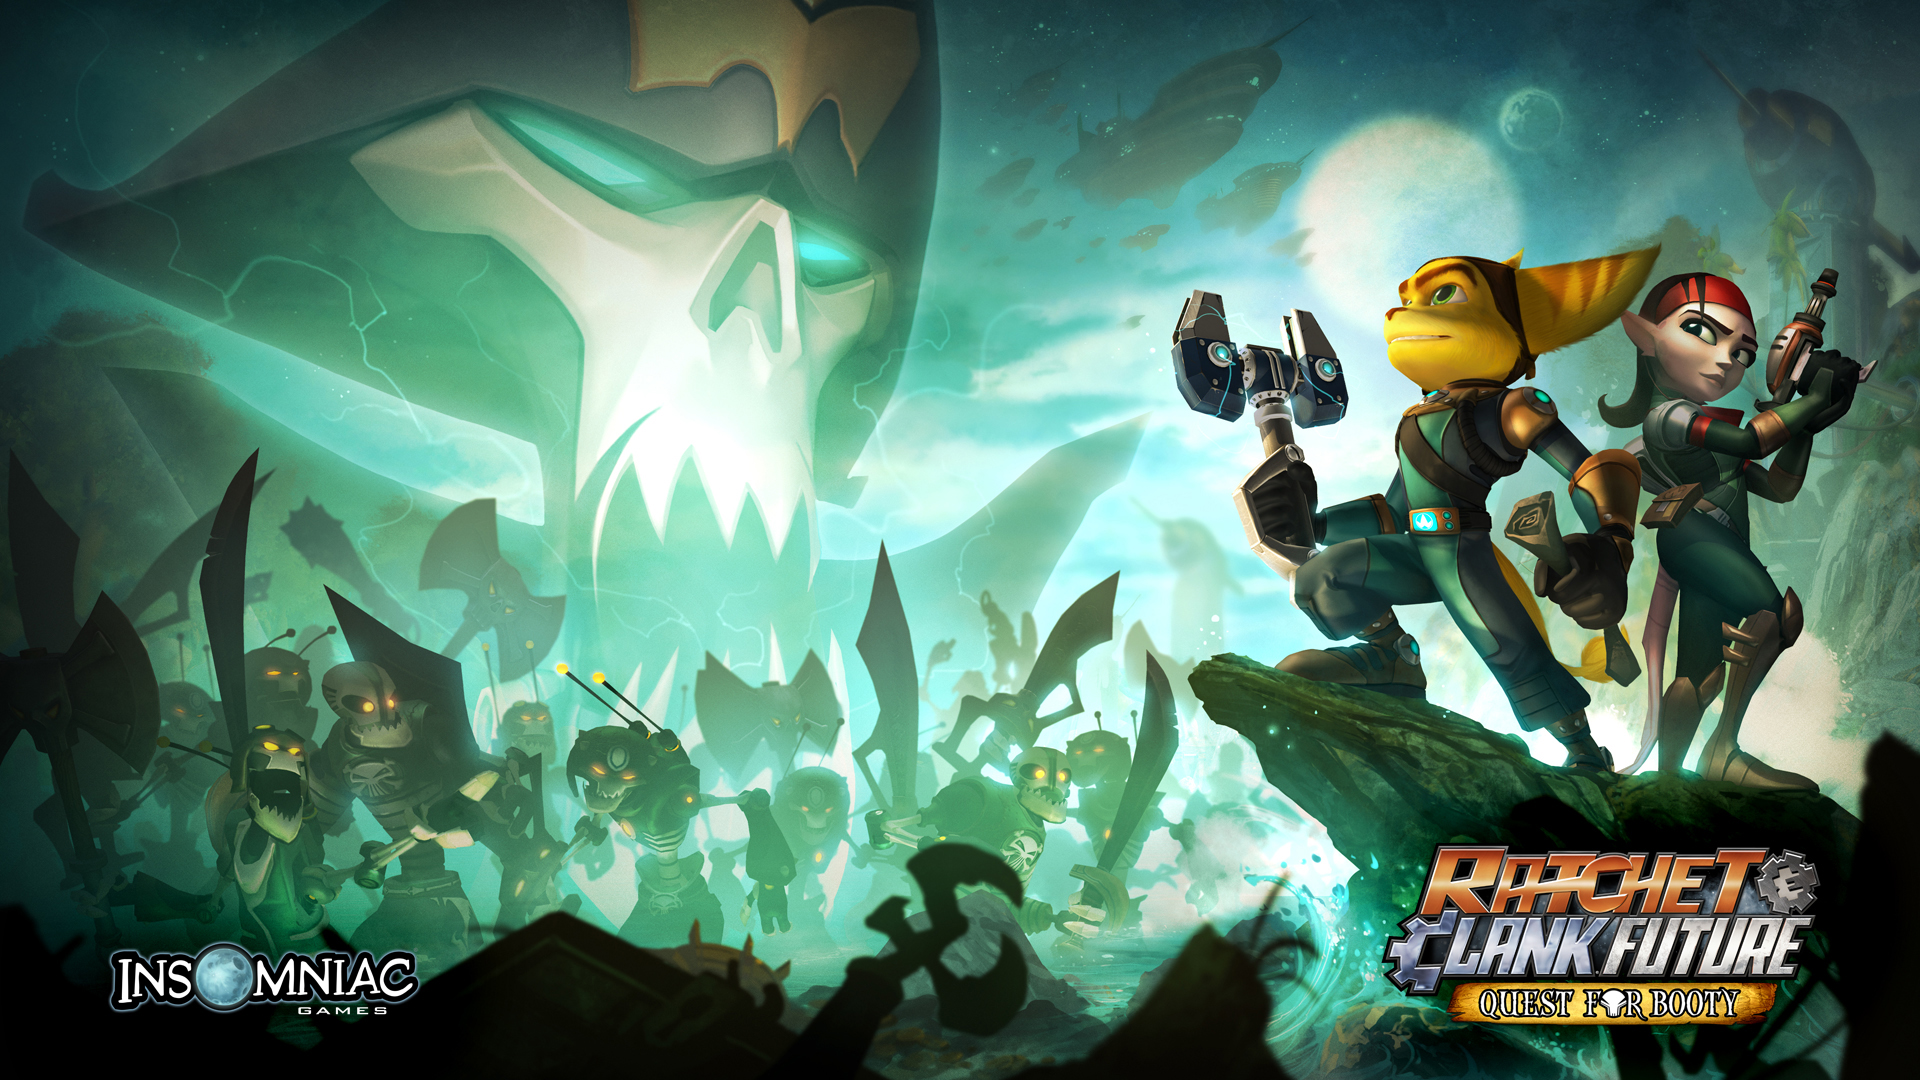 Video Game Ratchet & Clank Future: Quest for Booty HD Wallpaper | Background Image